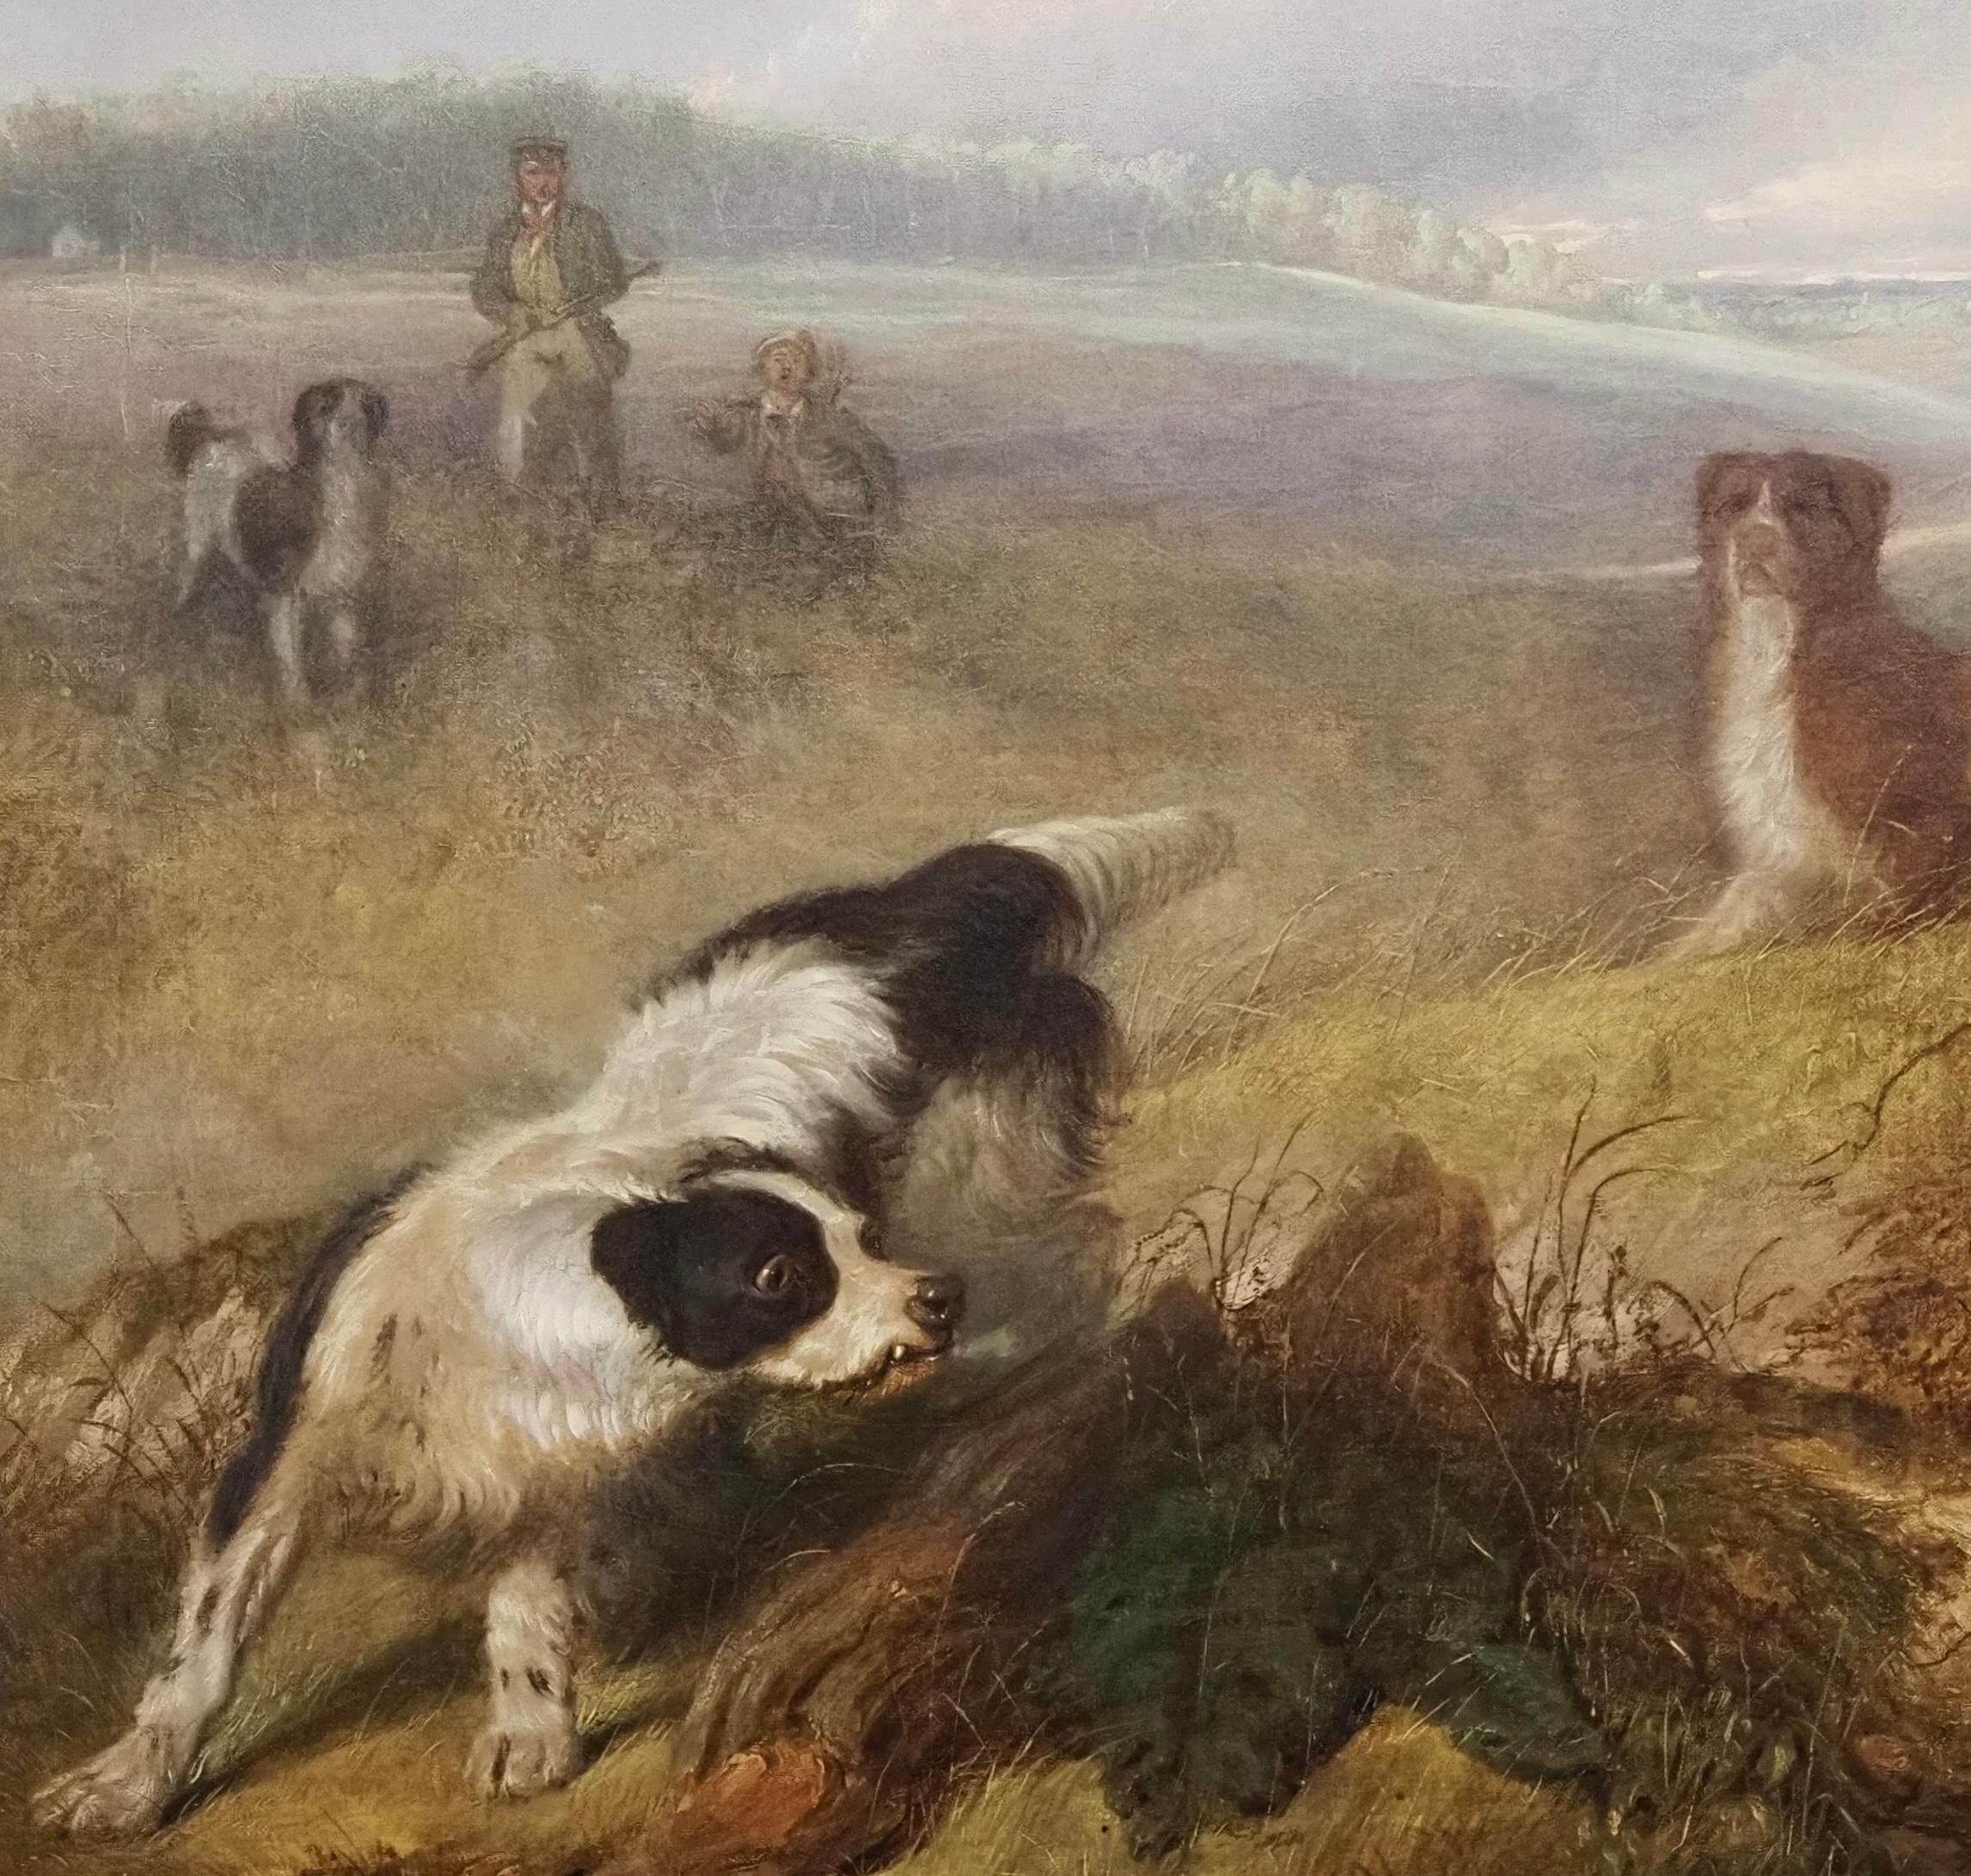 Martin Theodore Ward (1799-1874)
Setters on the scent
Signed M T Ward lower left
Oil on canvas
Canvas Size - 18 x 24 in
Framed Size - 23 x 29 in

Martin Theodore Ward, a distinguished artist renowned for his exquisite portrayal of sporting scenes,